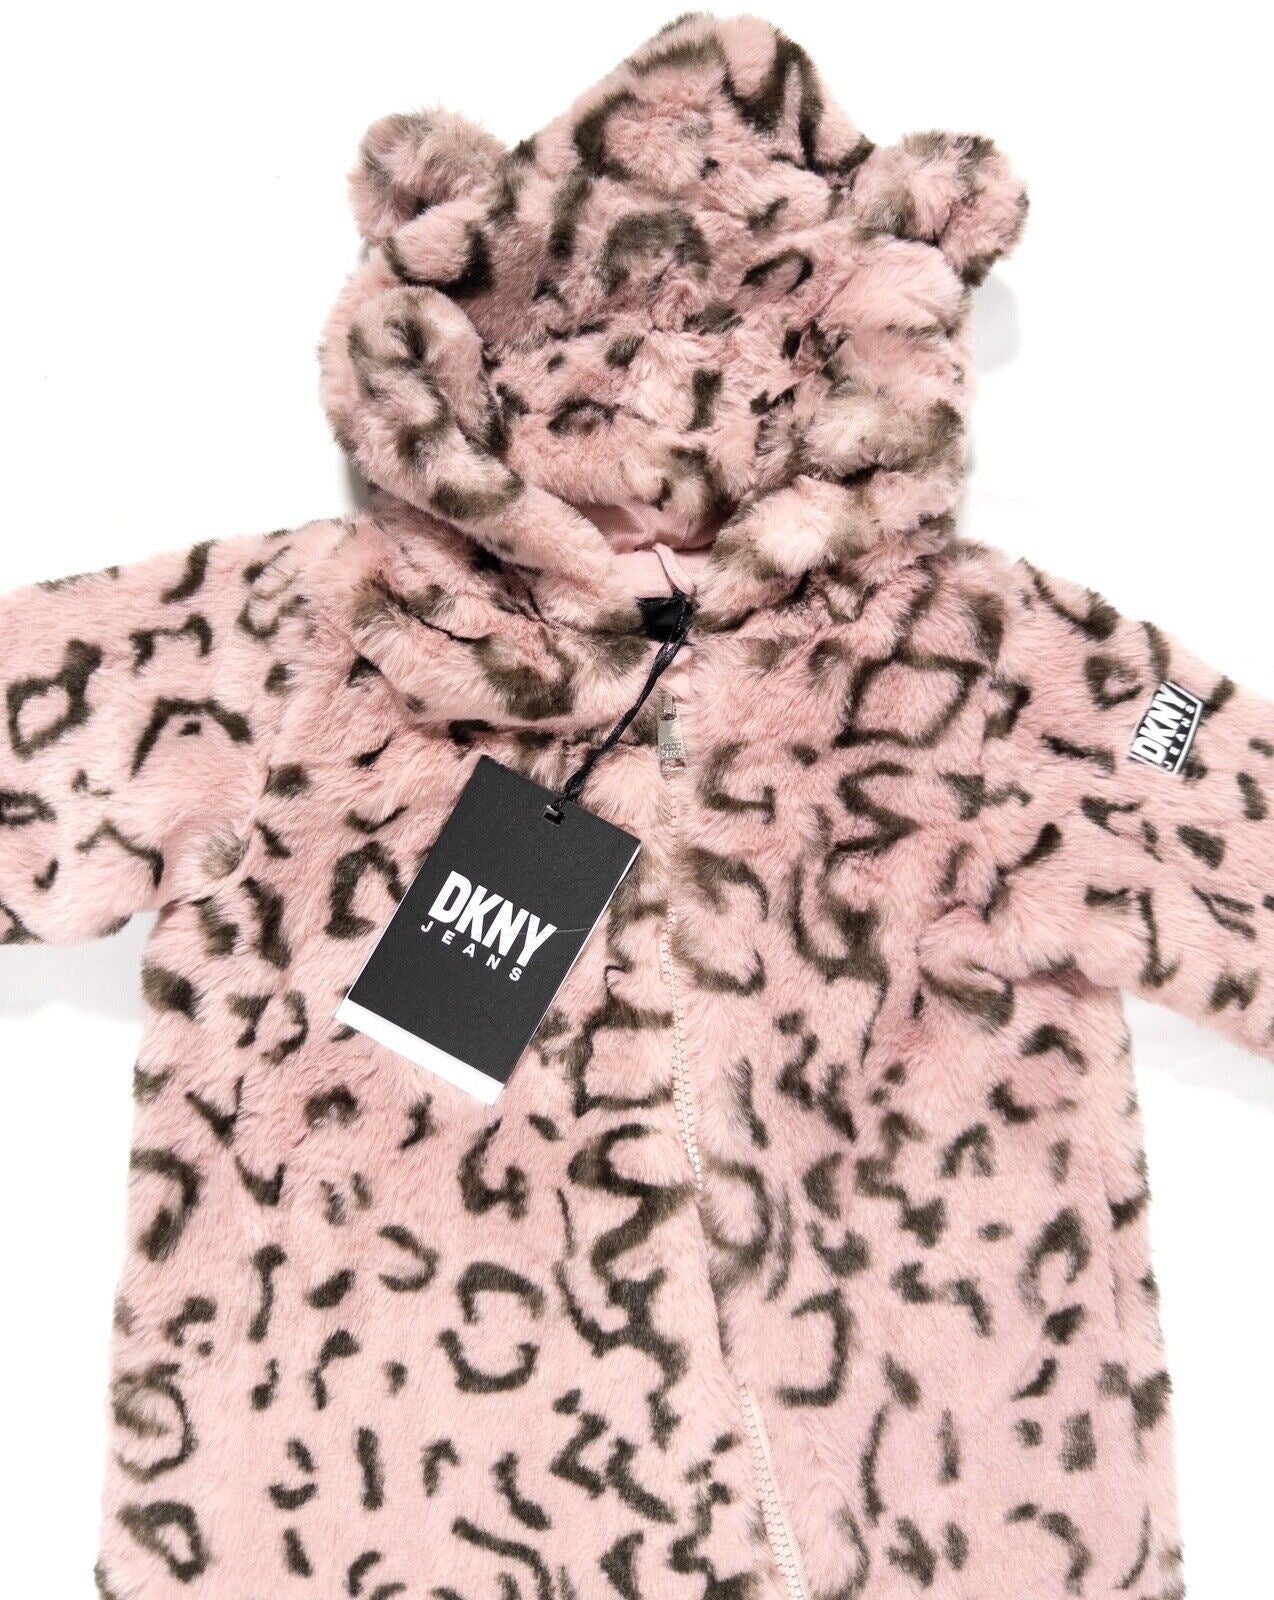 DKNY JEANS Baby Infant All in One Snowsuit Pink Size UK 6-9 Months